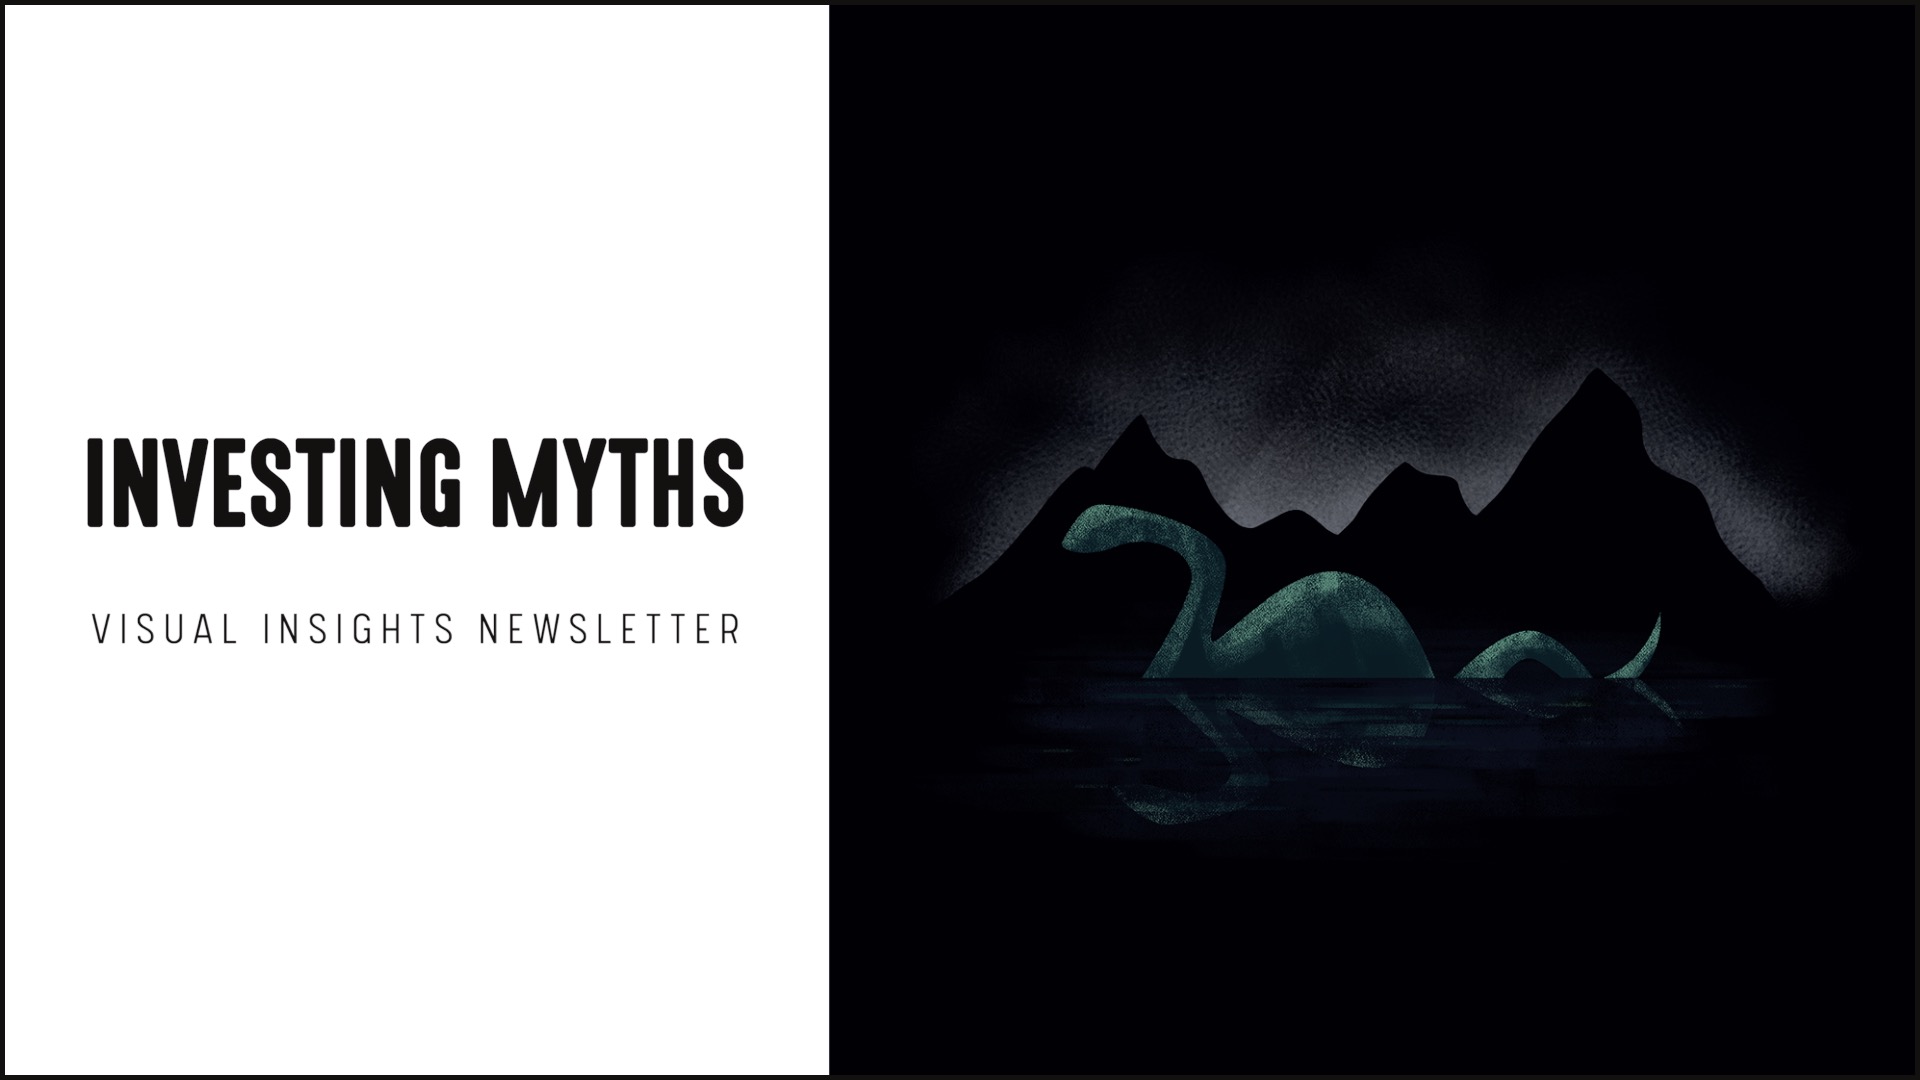 [NEW] Visual Insights Newsletter | Investing Myths